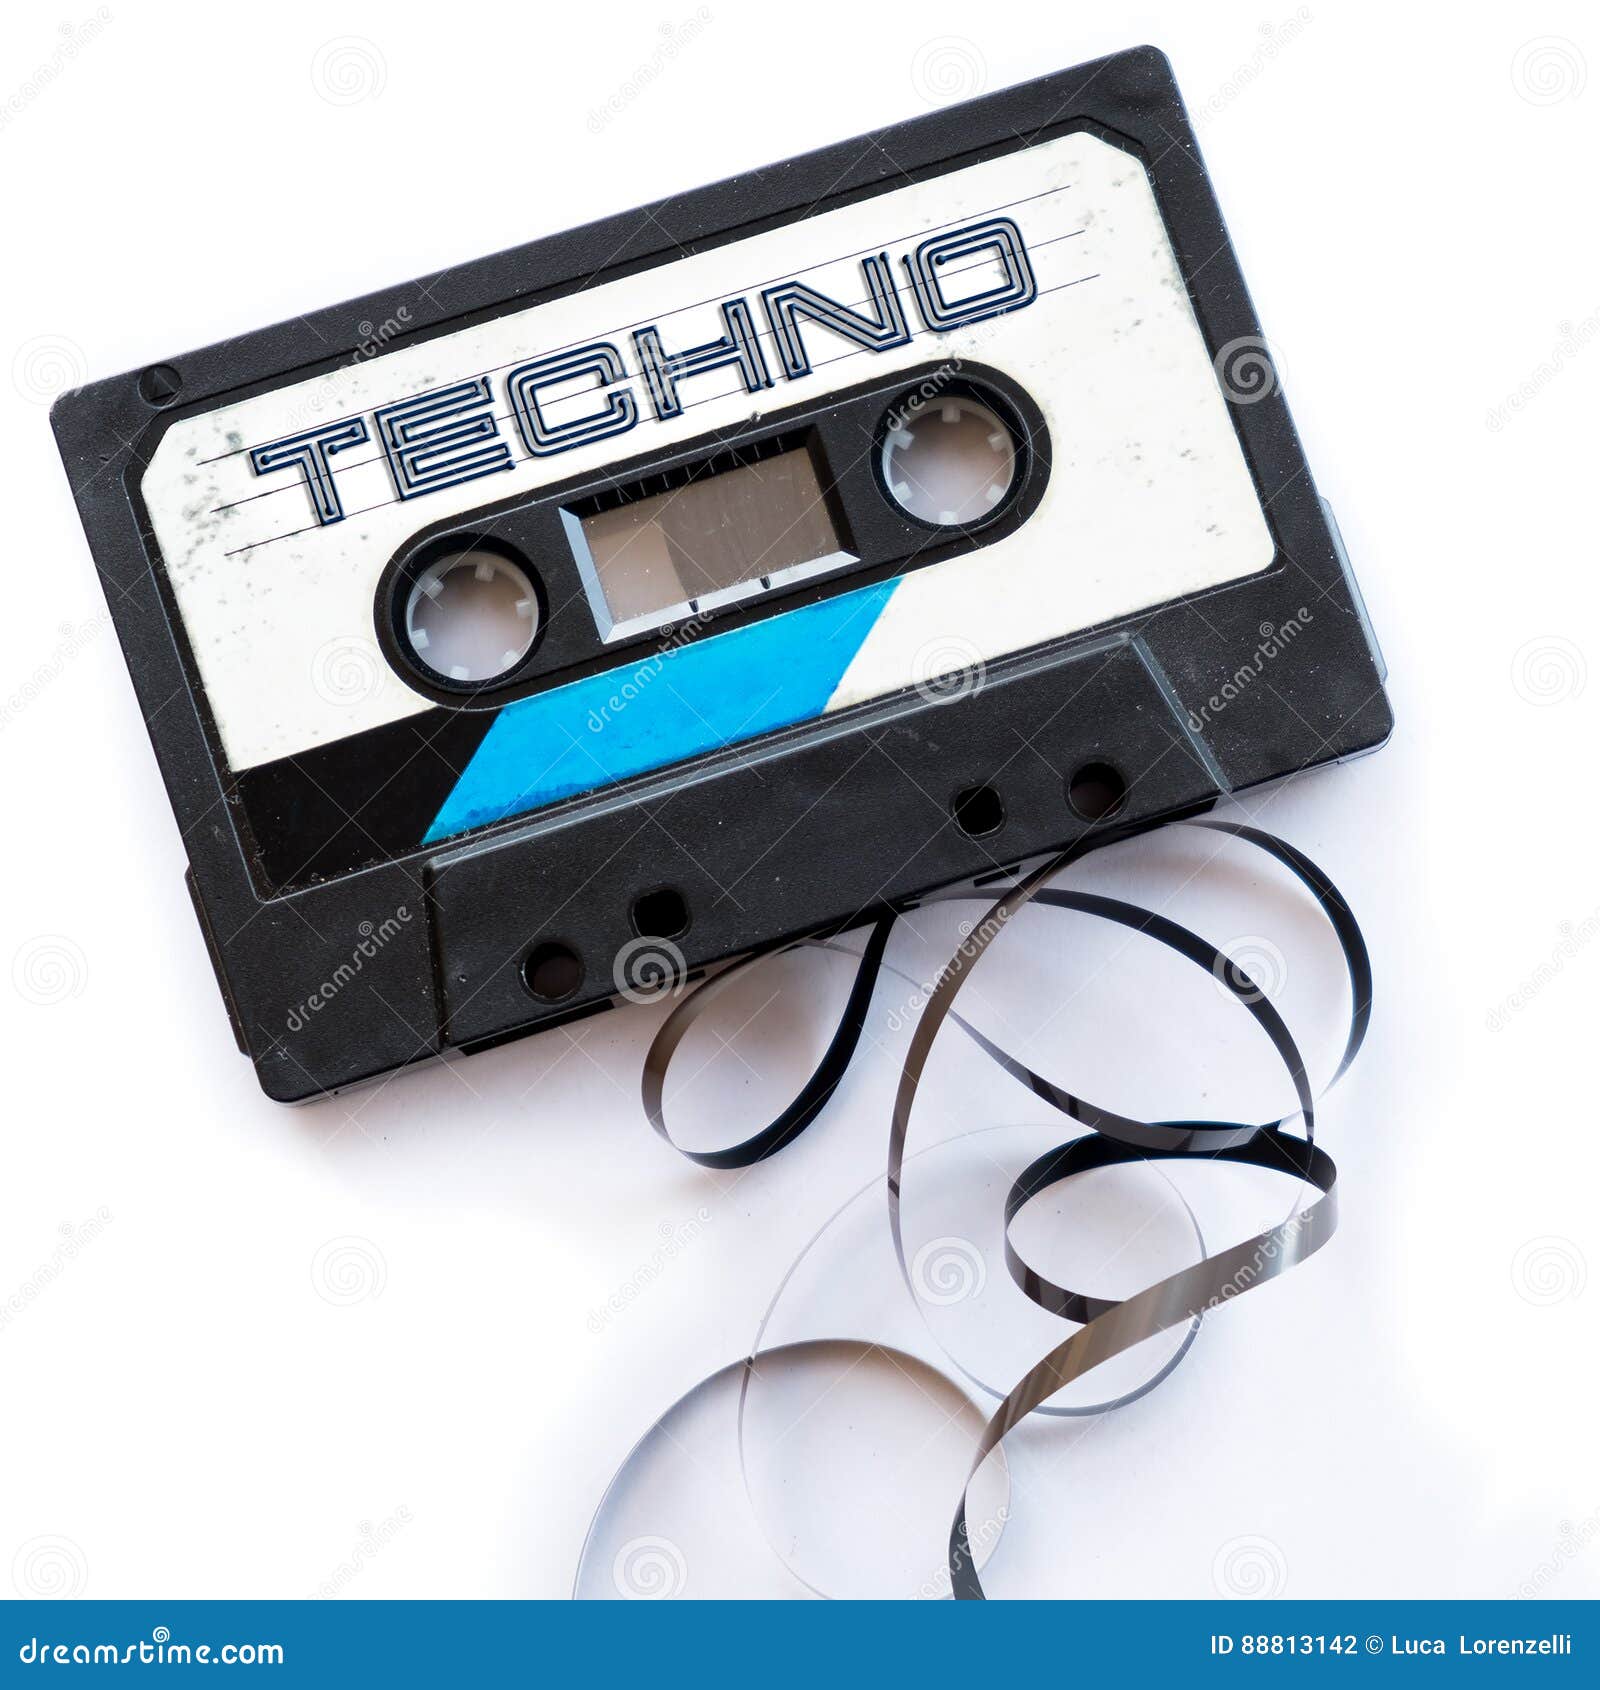 techno music dance musical genres audio tape label